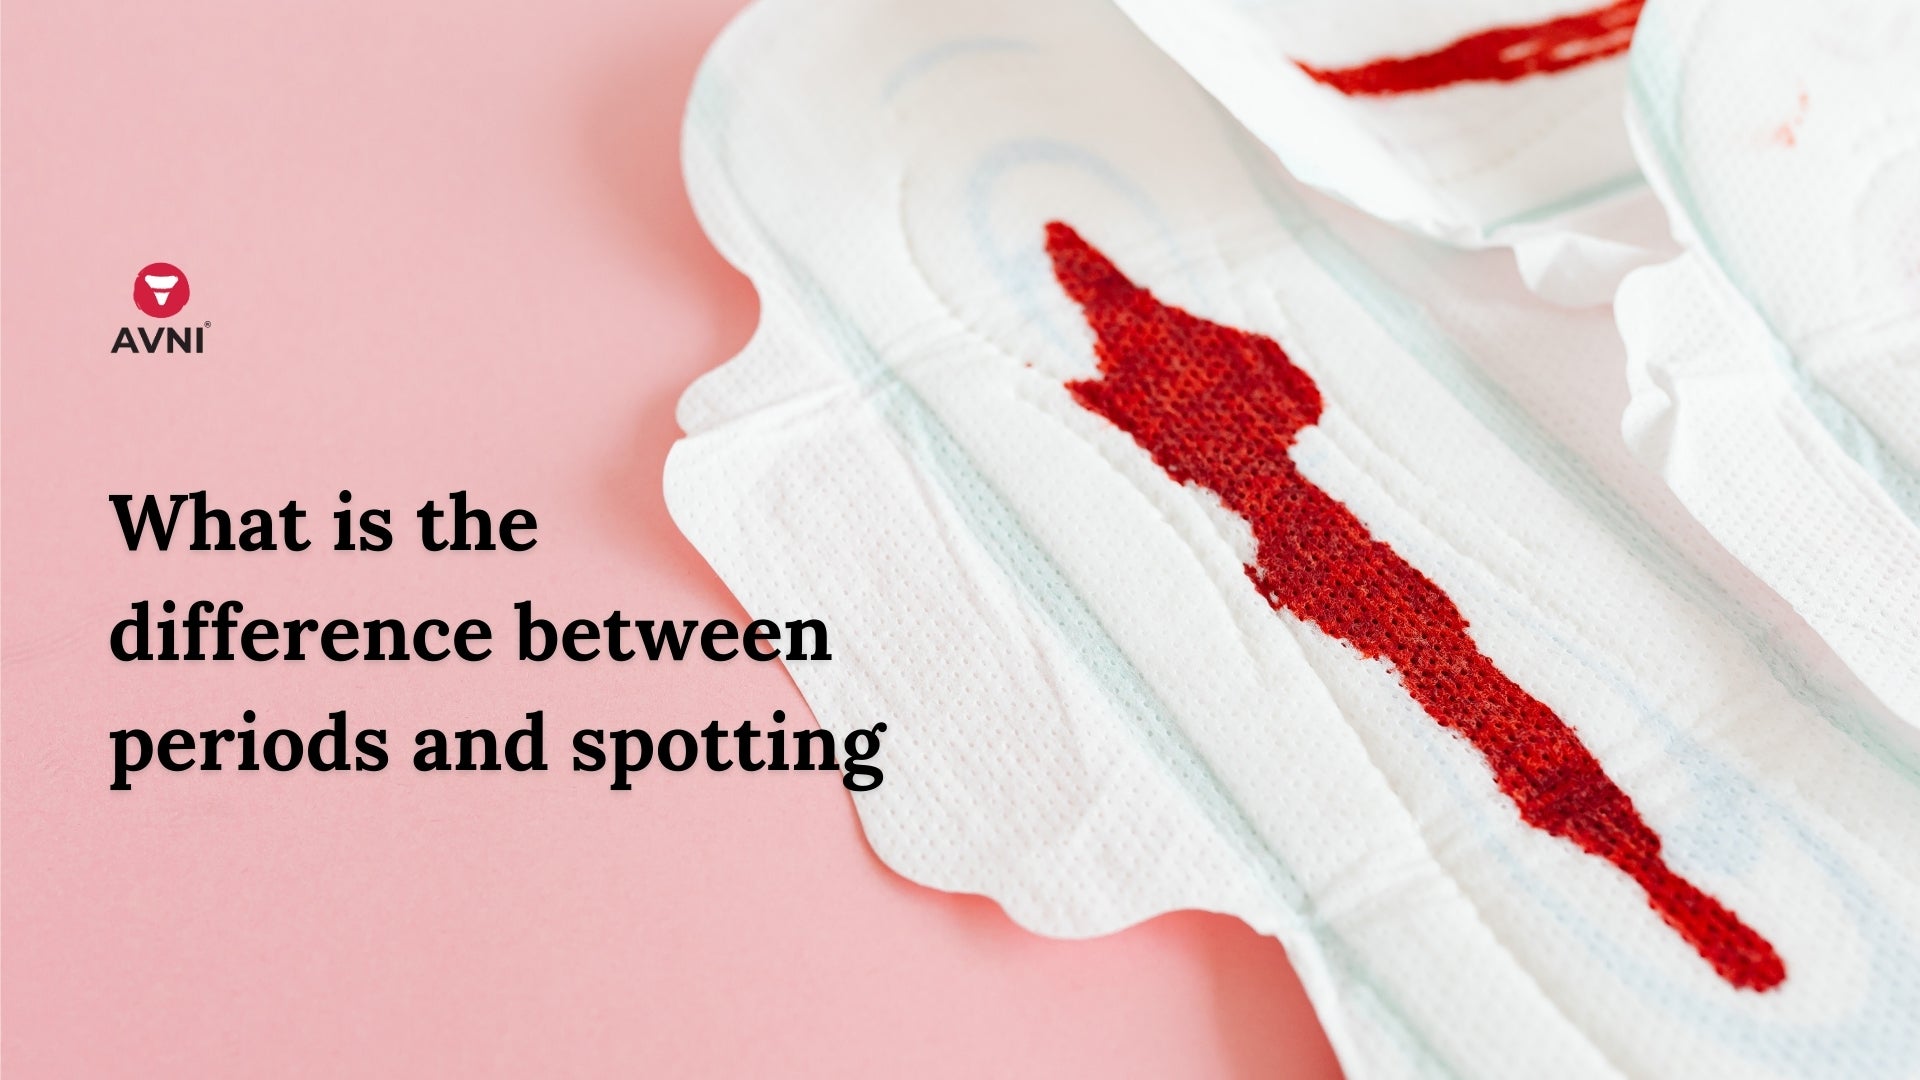 Spotting before period: is it normal to spot before your period?